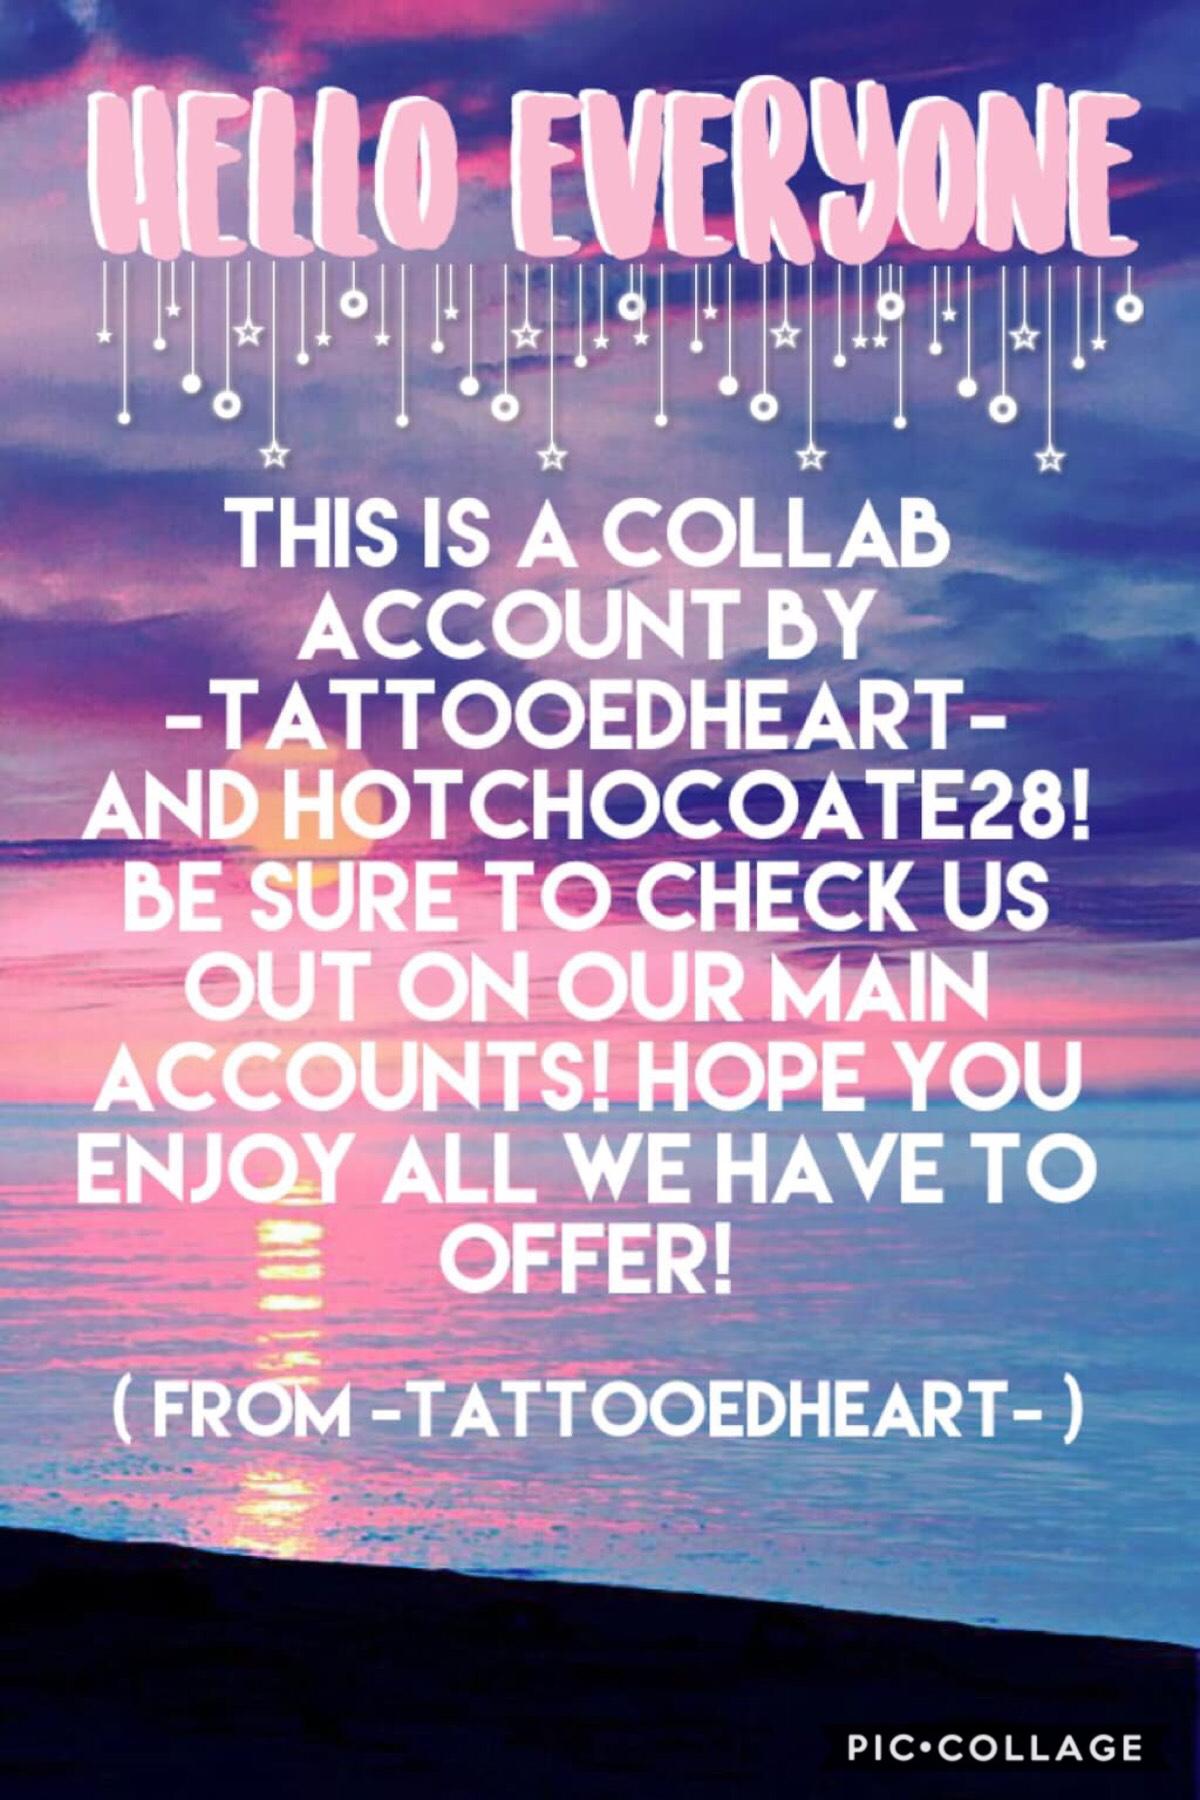 💖Tap💖
Hey y'all!!! This is a collab account with me, Mihika, (aka -TattooedHeart-) and HotChoclate28!!!